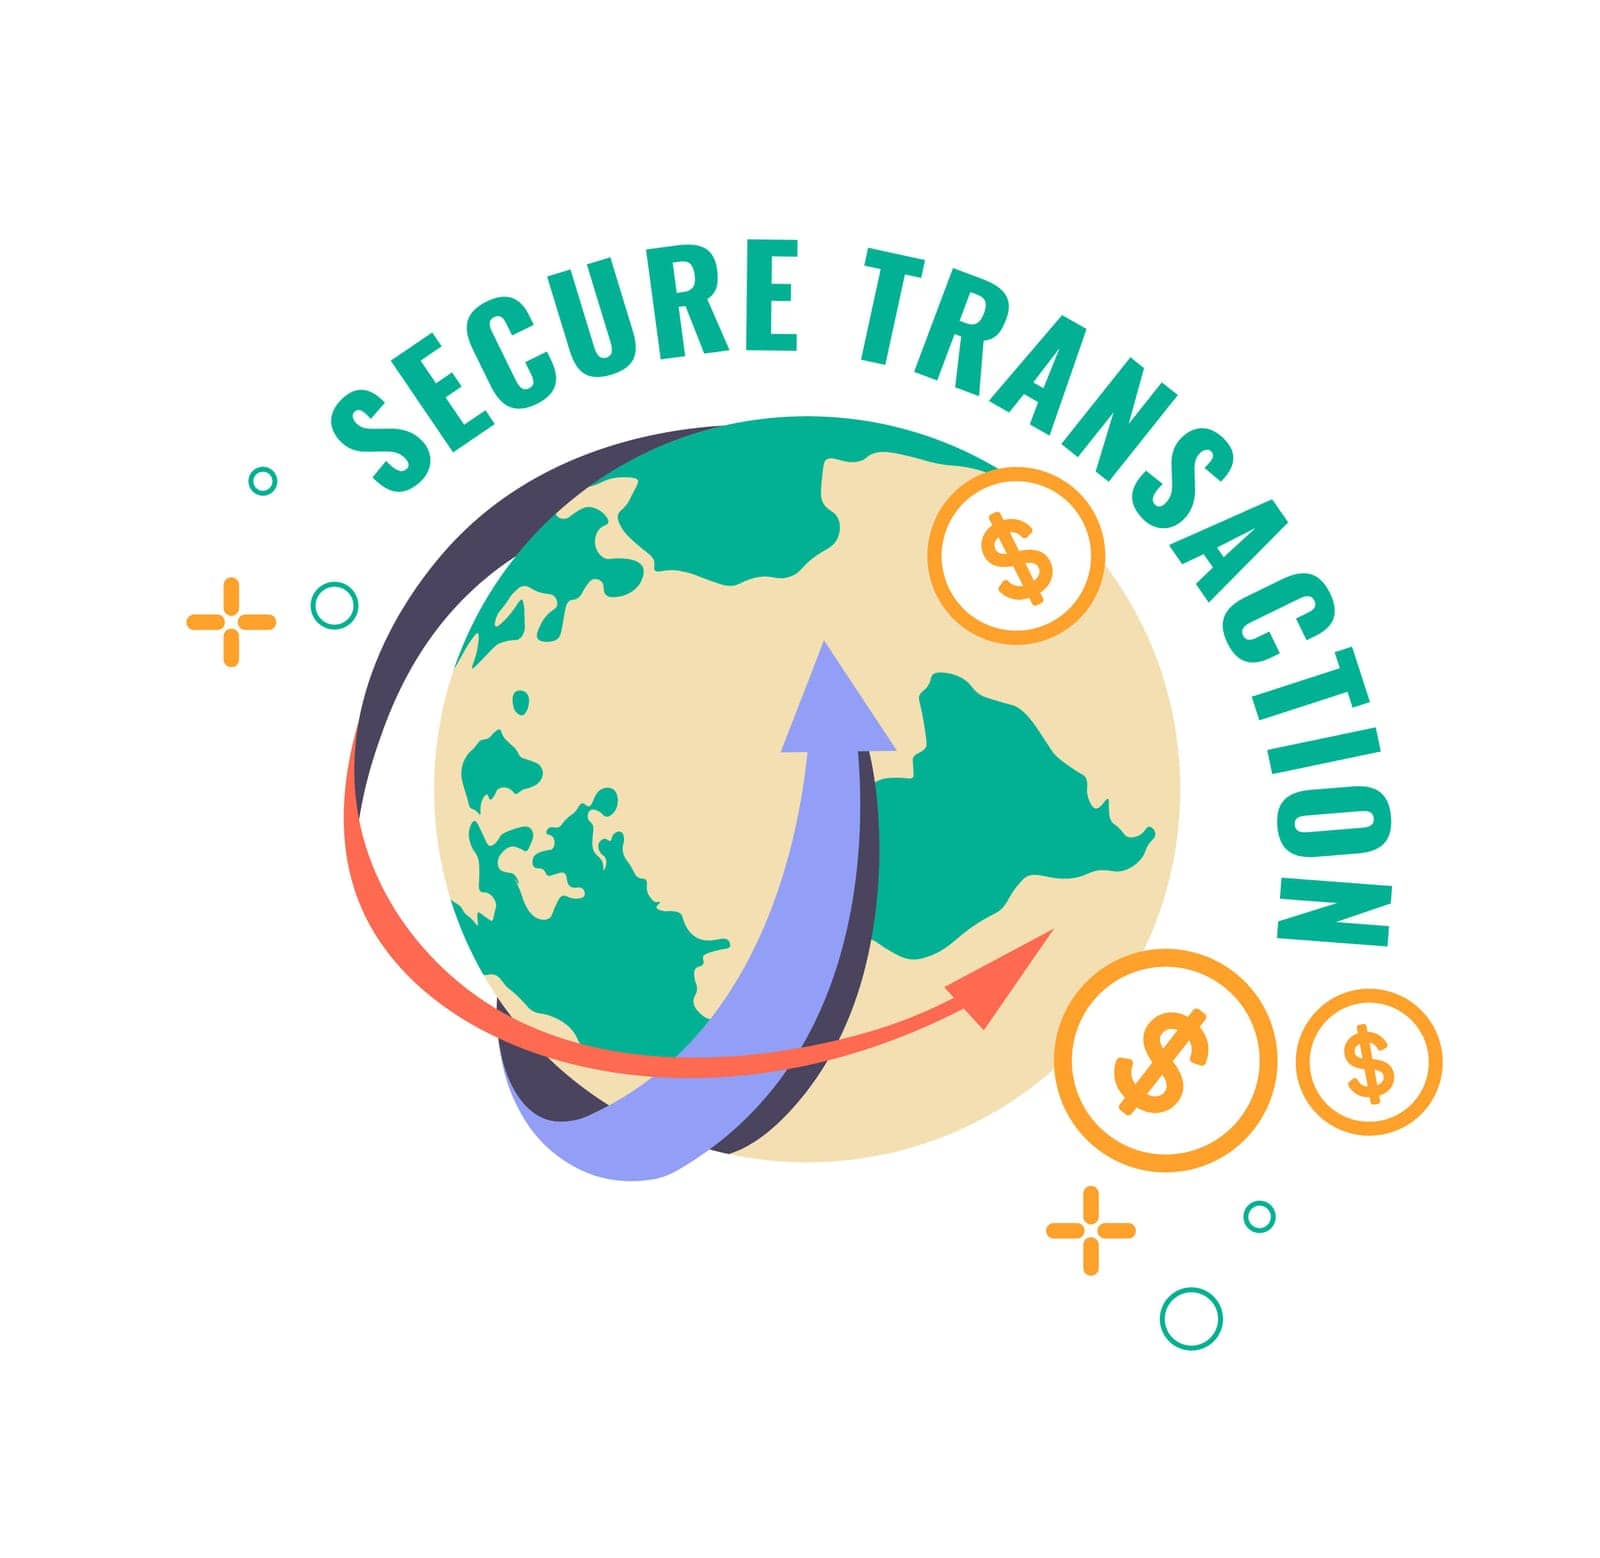 Secure transaction, financial business dealings by Sonulkaster